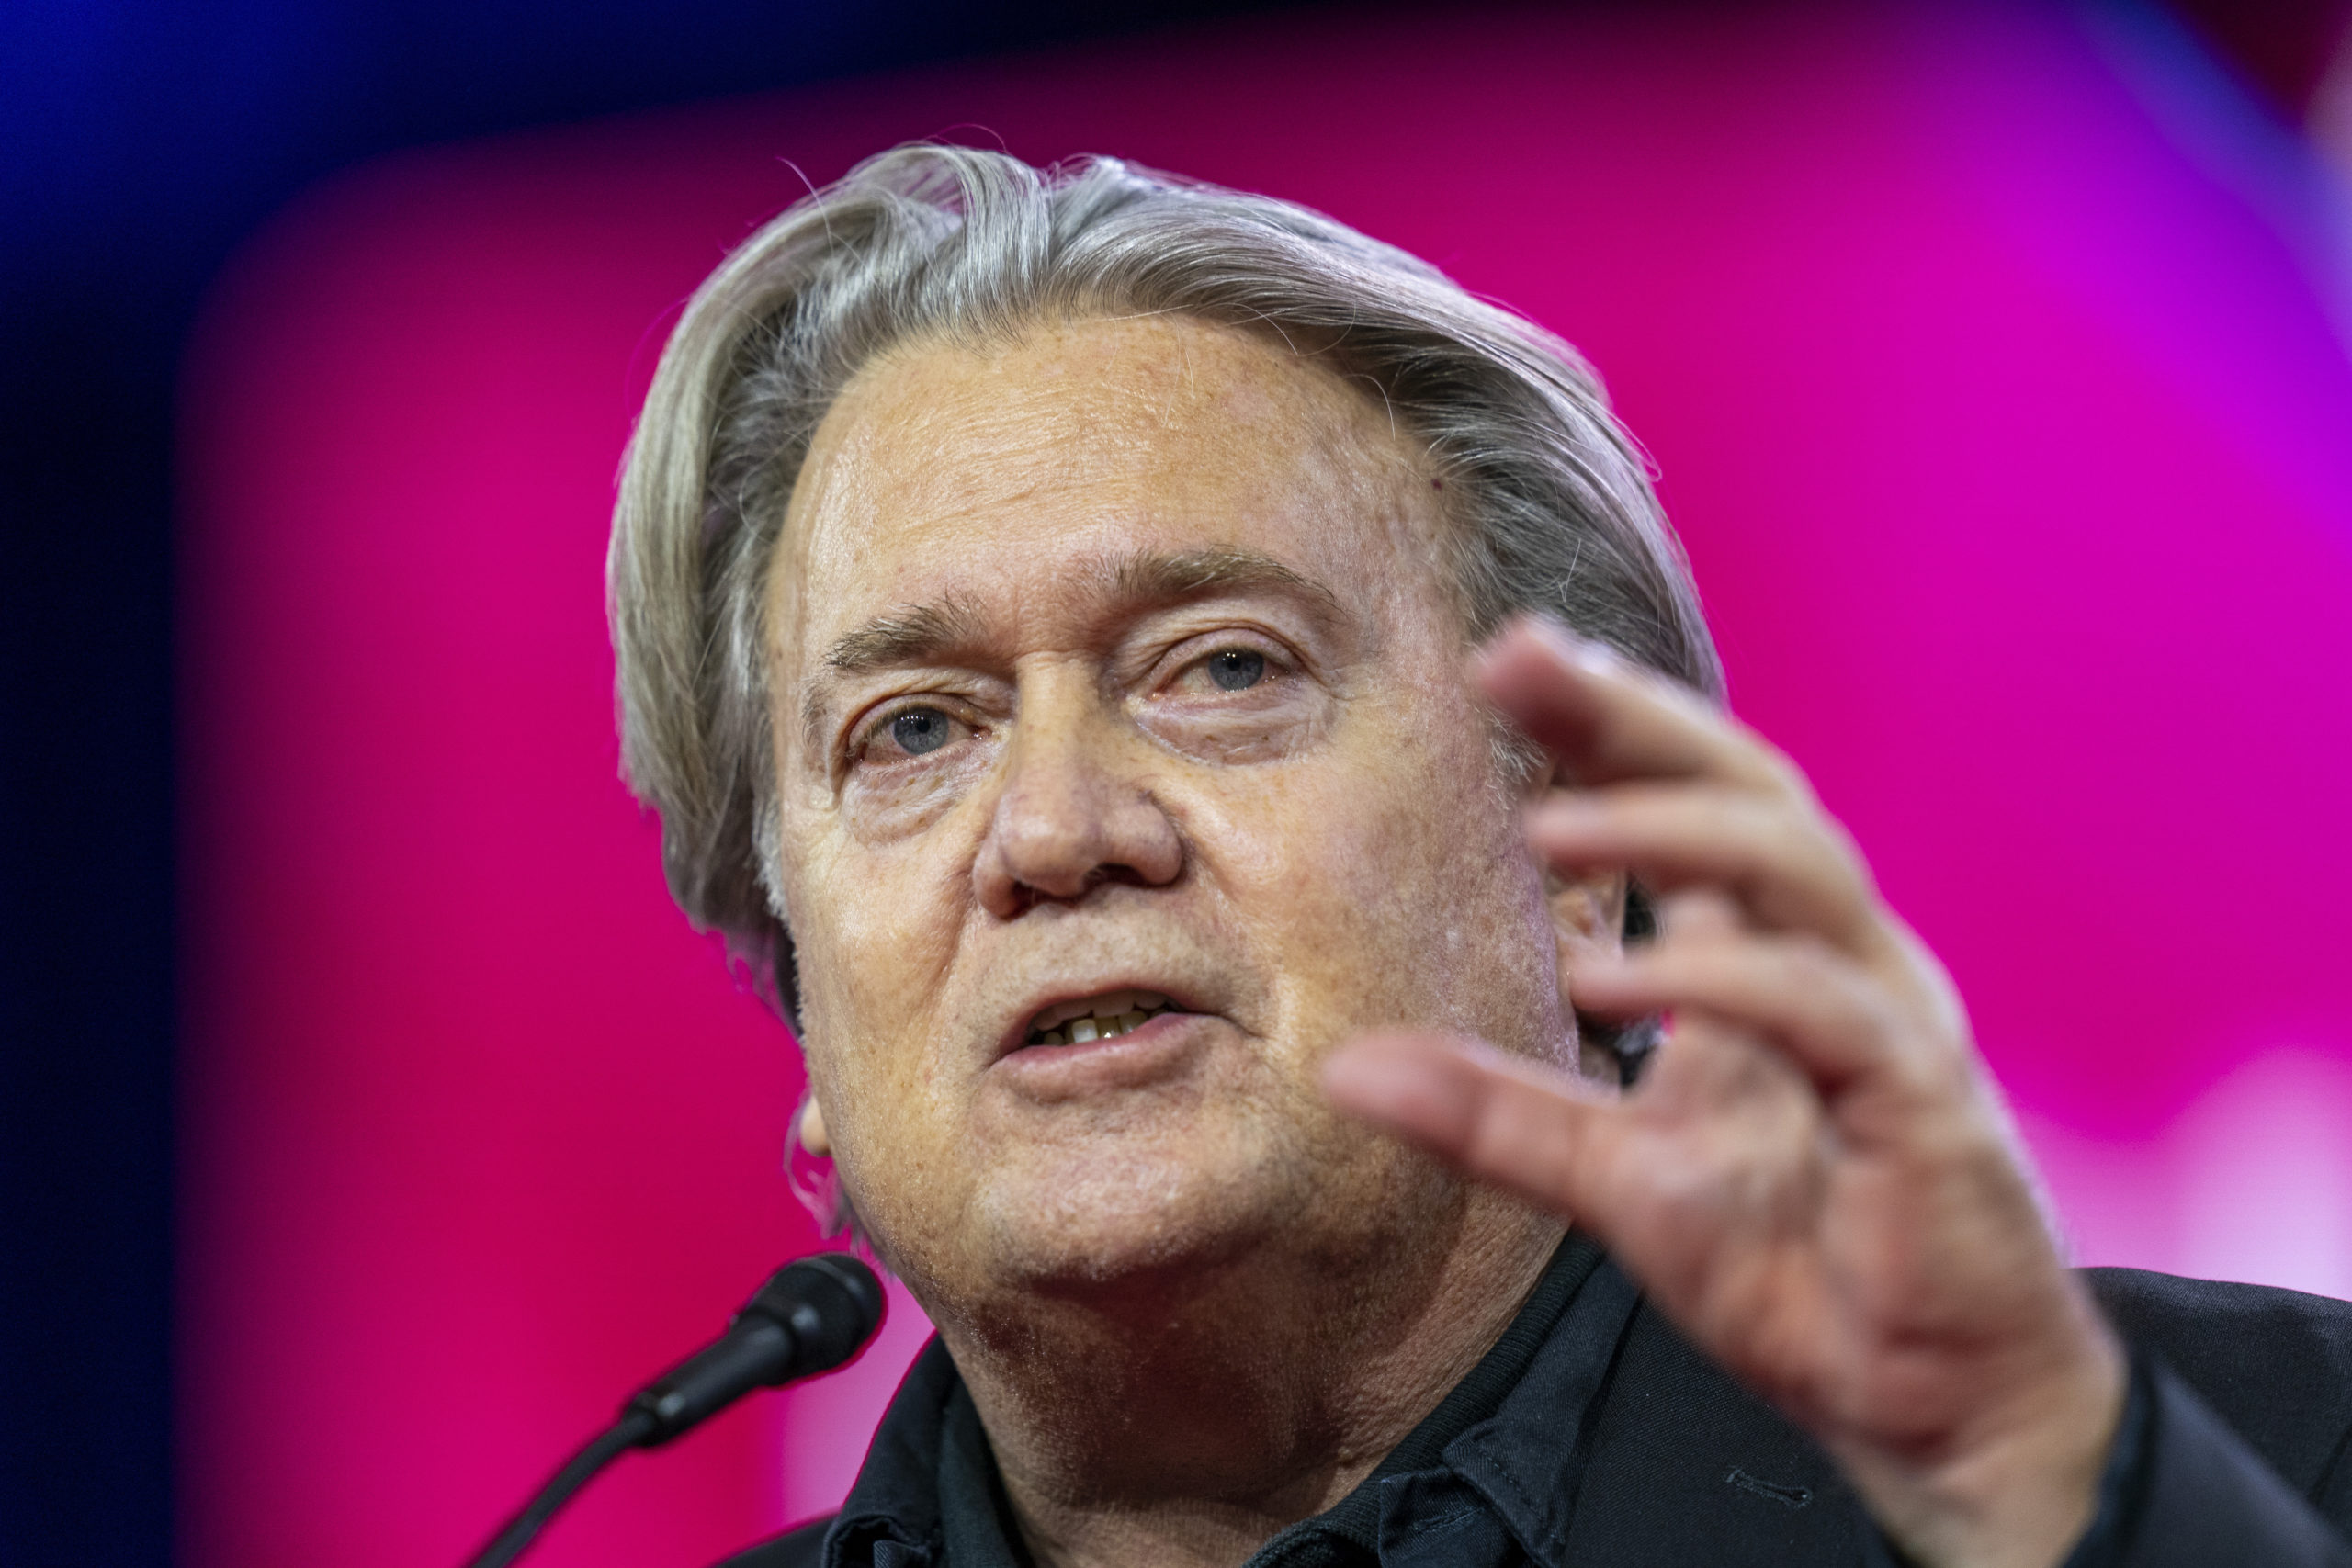 Former President Donald Trump's longtime ally Steve Bannon has appealed his criminal conviction for defying a subpoena from the House committee investigating the Jan. 6 incursion at the U.S. Capitol.